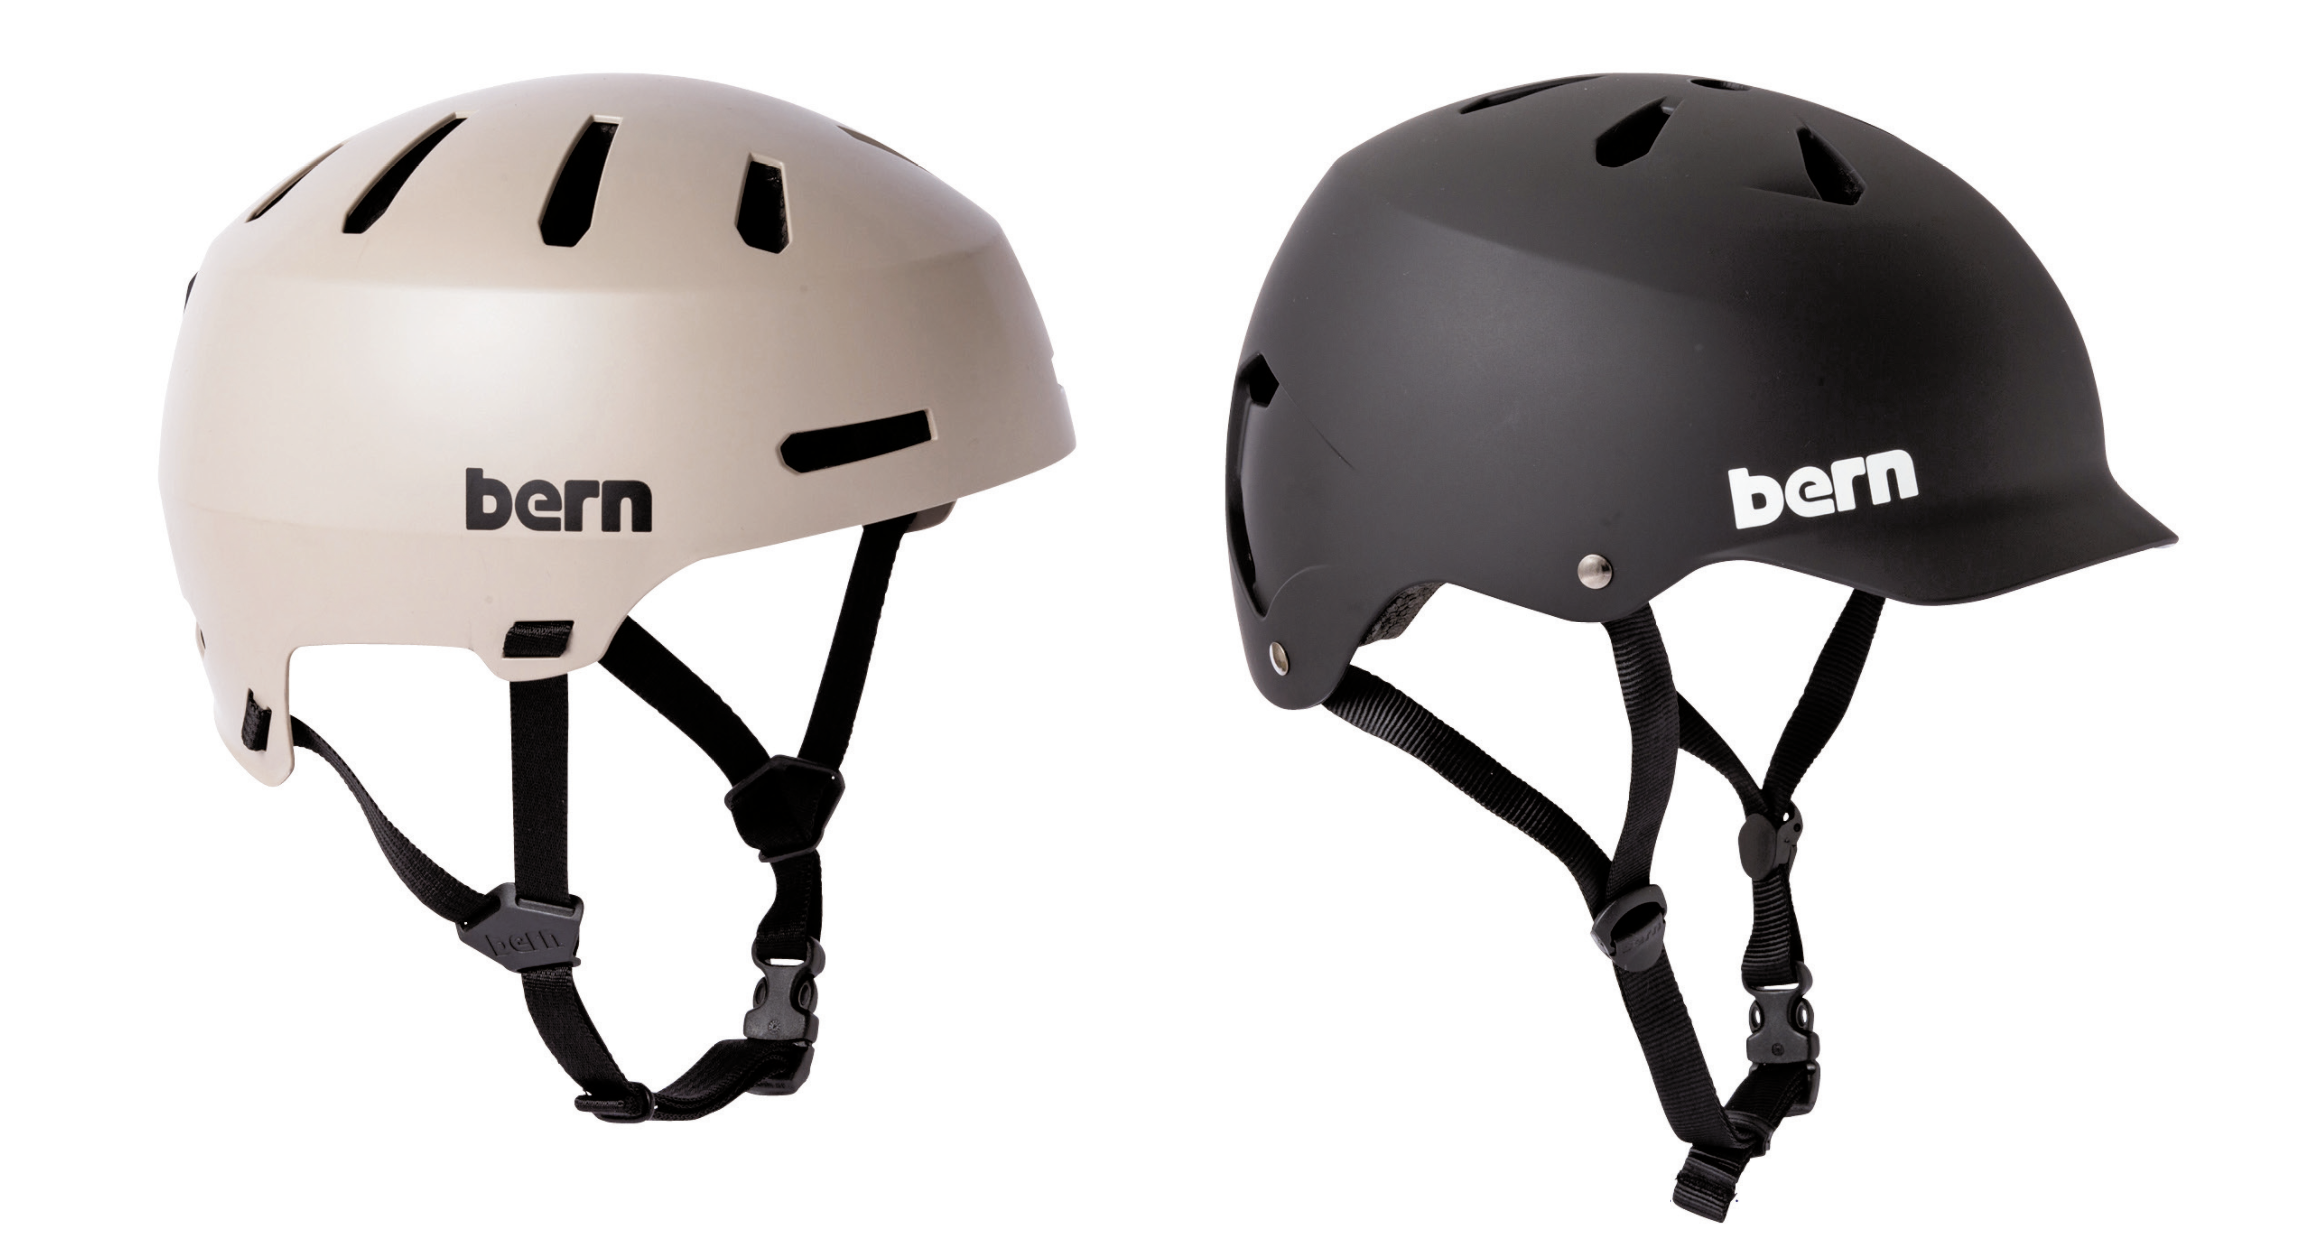 A helmet that can be customized according to the activity. bern